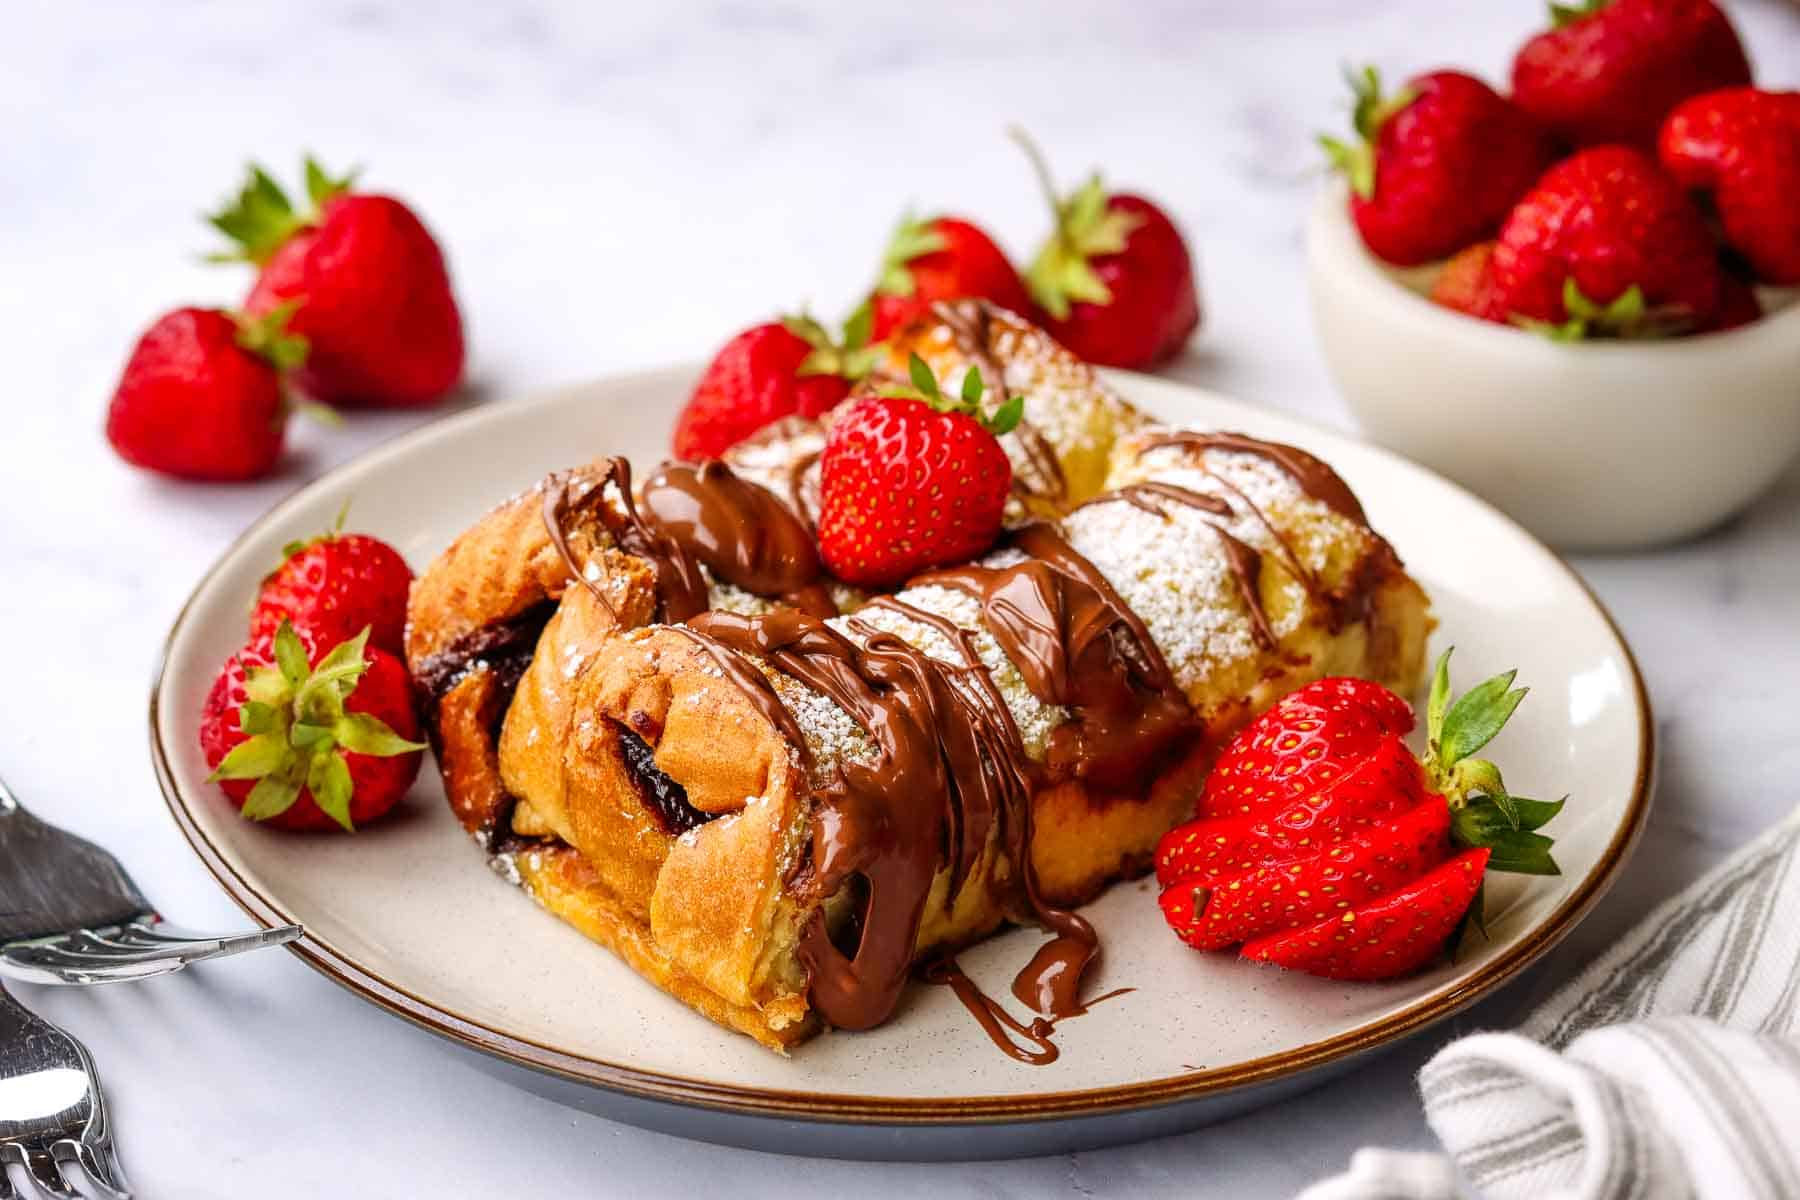 nutella french toast casserole served on a plate with fresh strawberries on the side